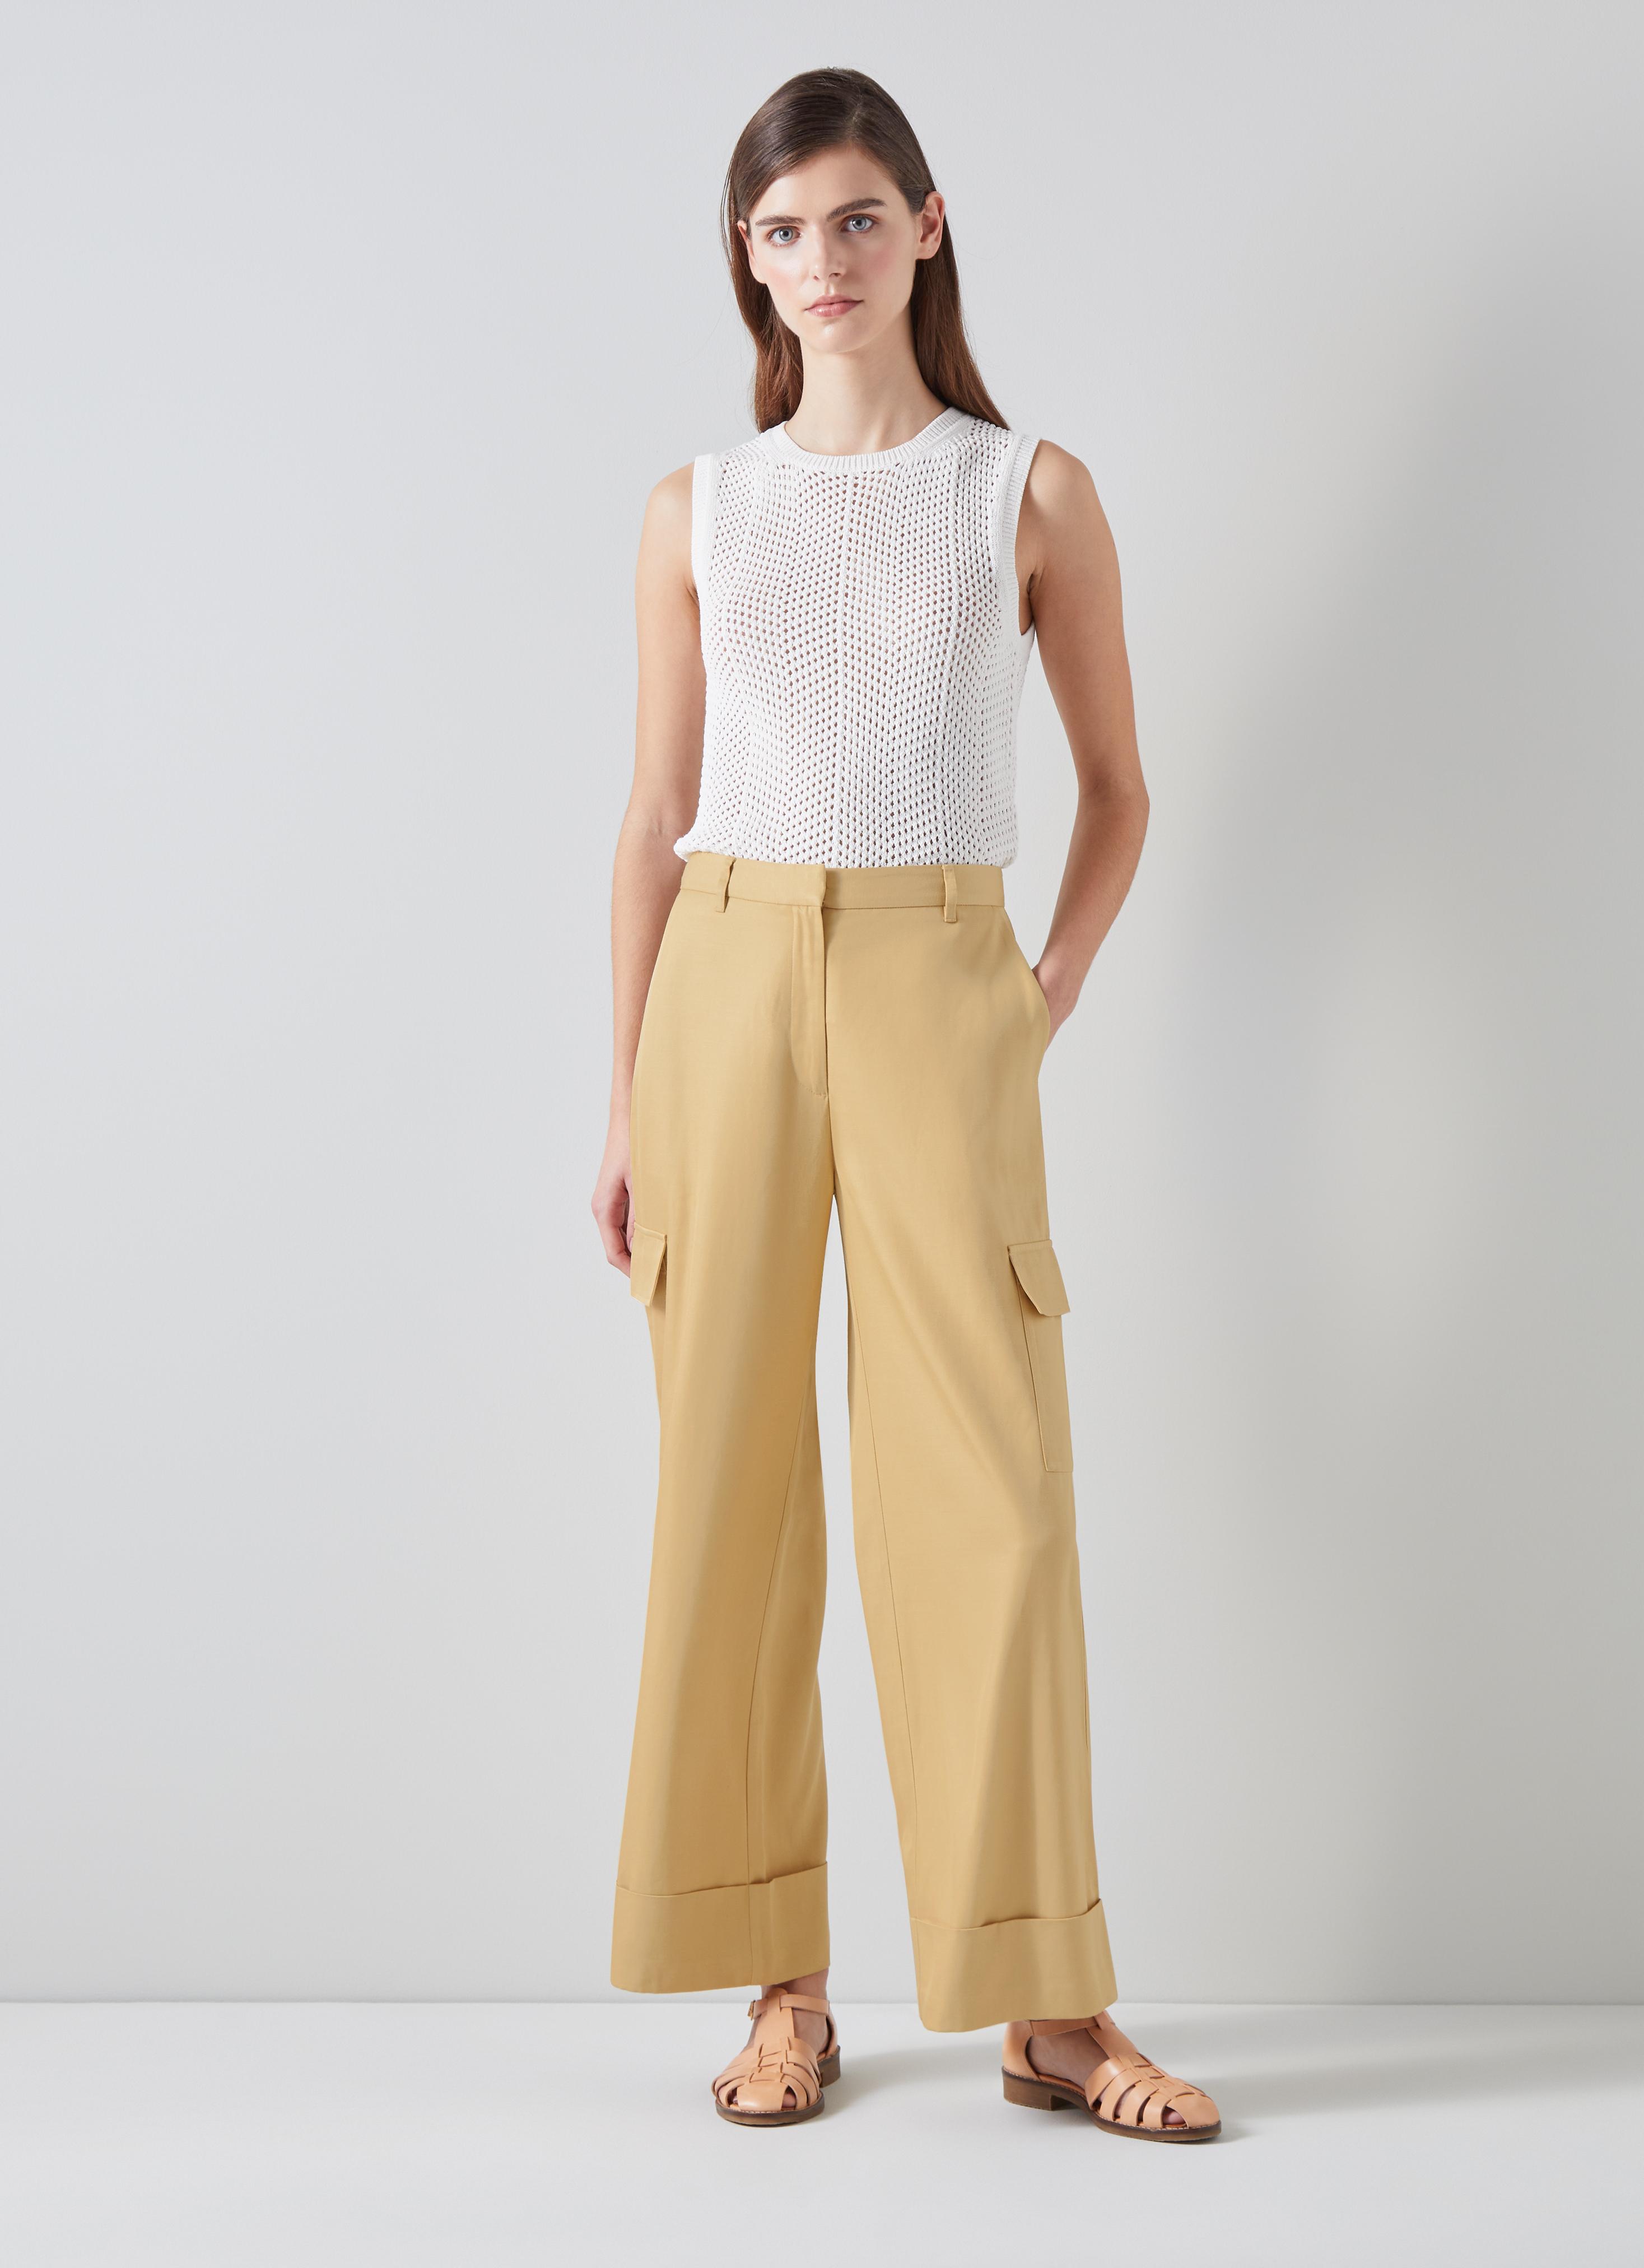 Riviera Stone Blend Trousers with TENCEL Lyocell, Stone